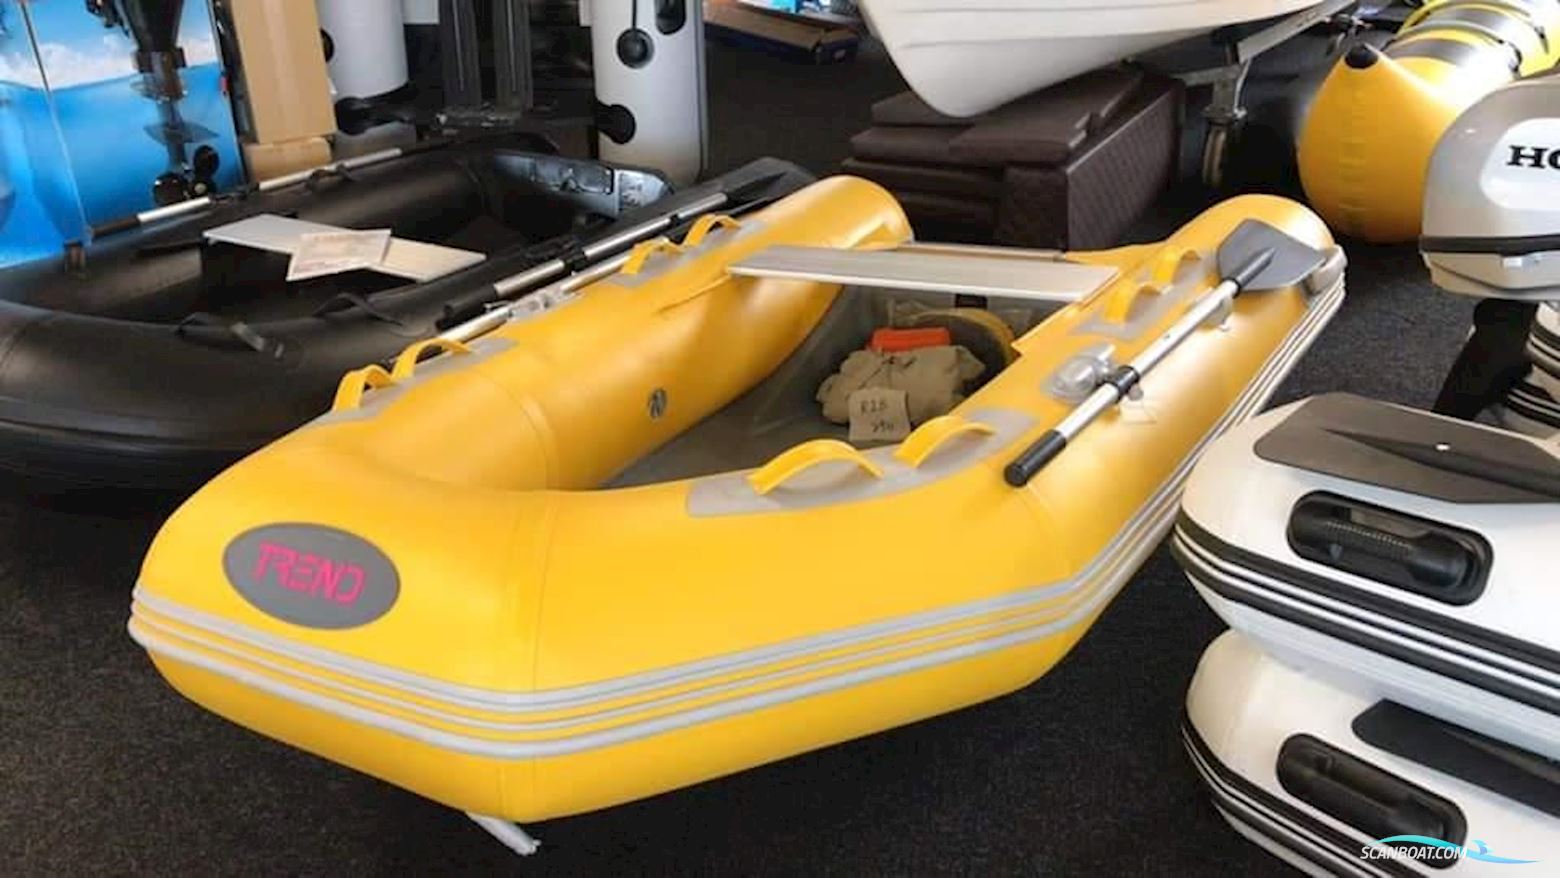 Trend 270 Rib Inflatable / Rib 2021, with Trend engine, The Netherlands